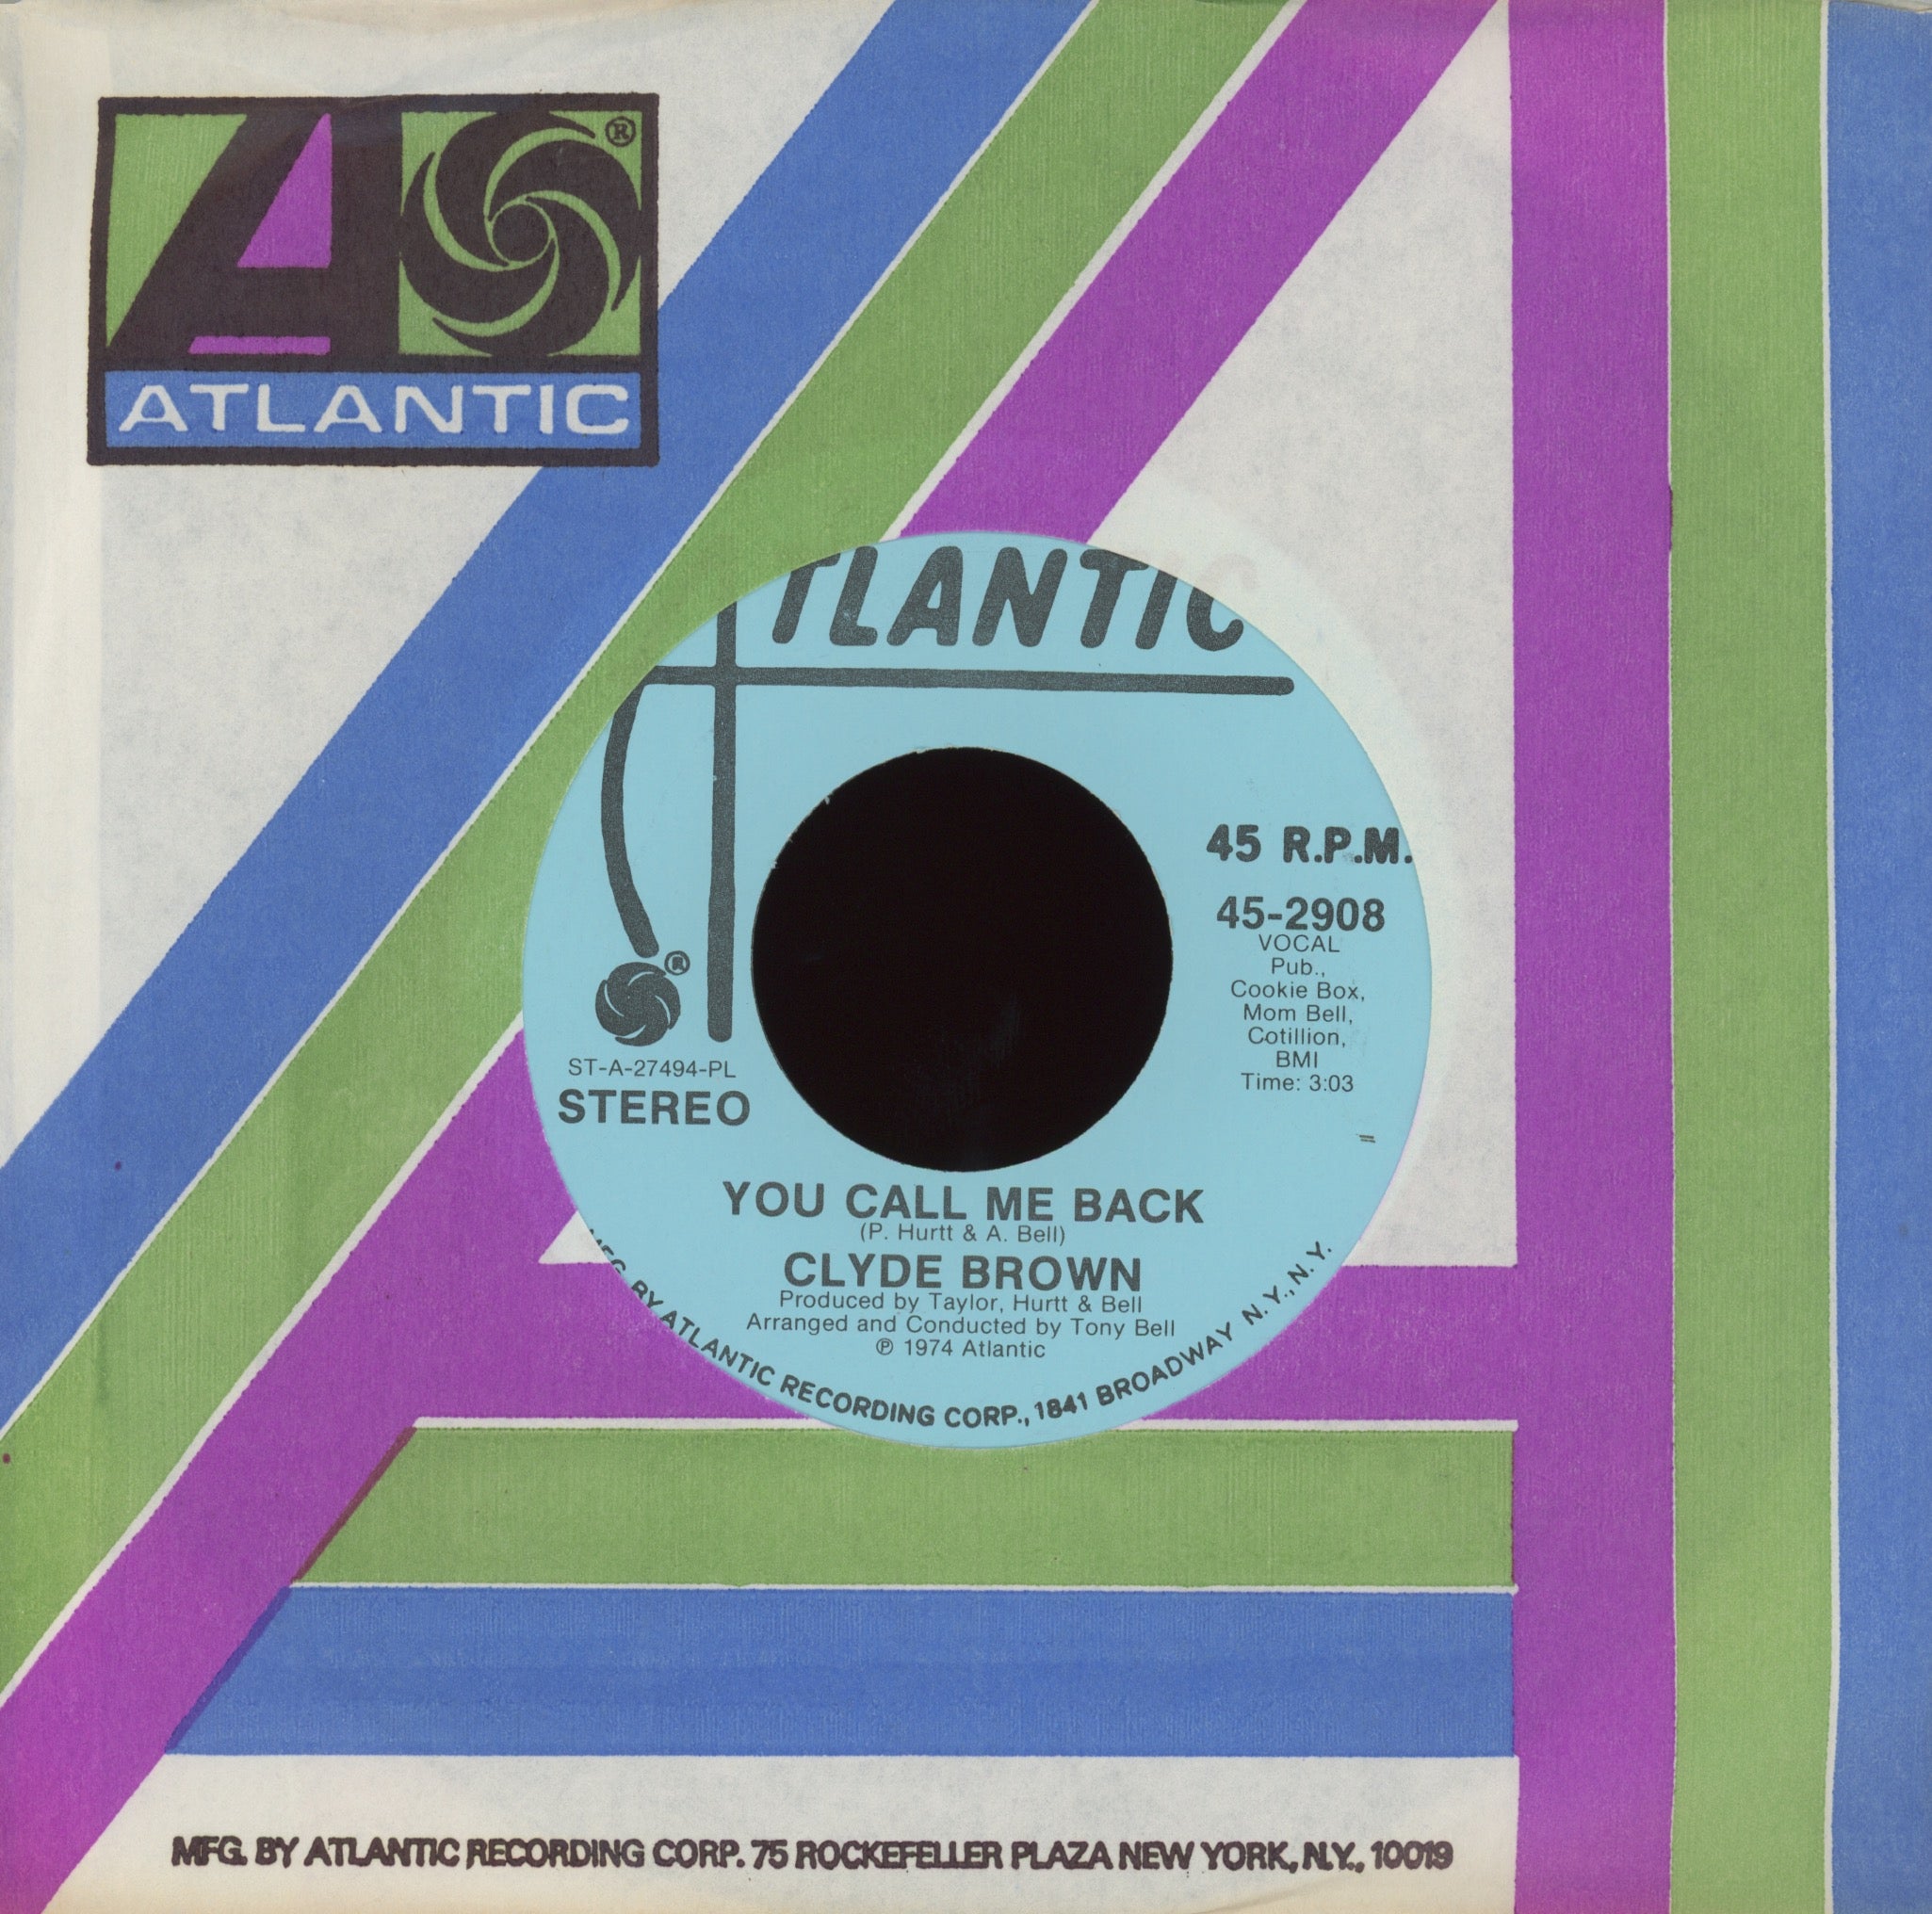 Clyde Brown - You Call Me Back on Atlantic Promo